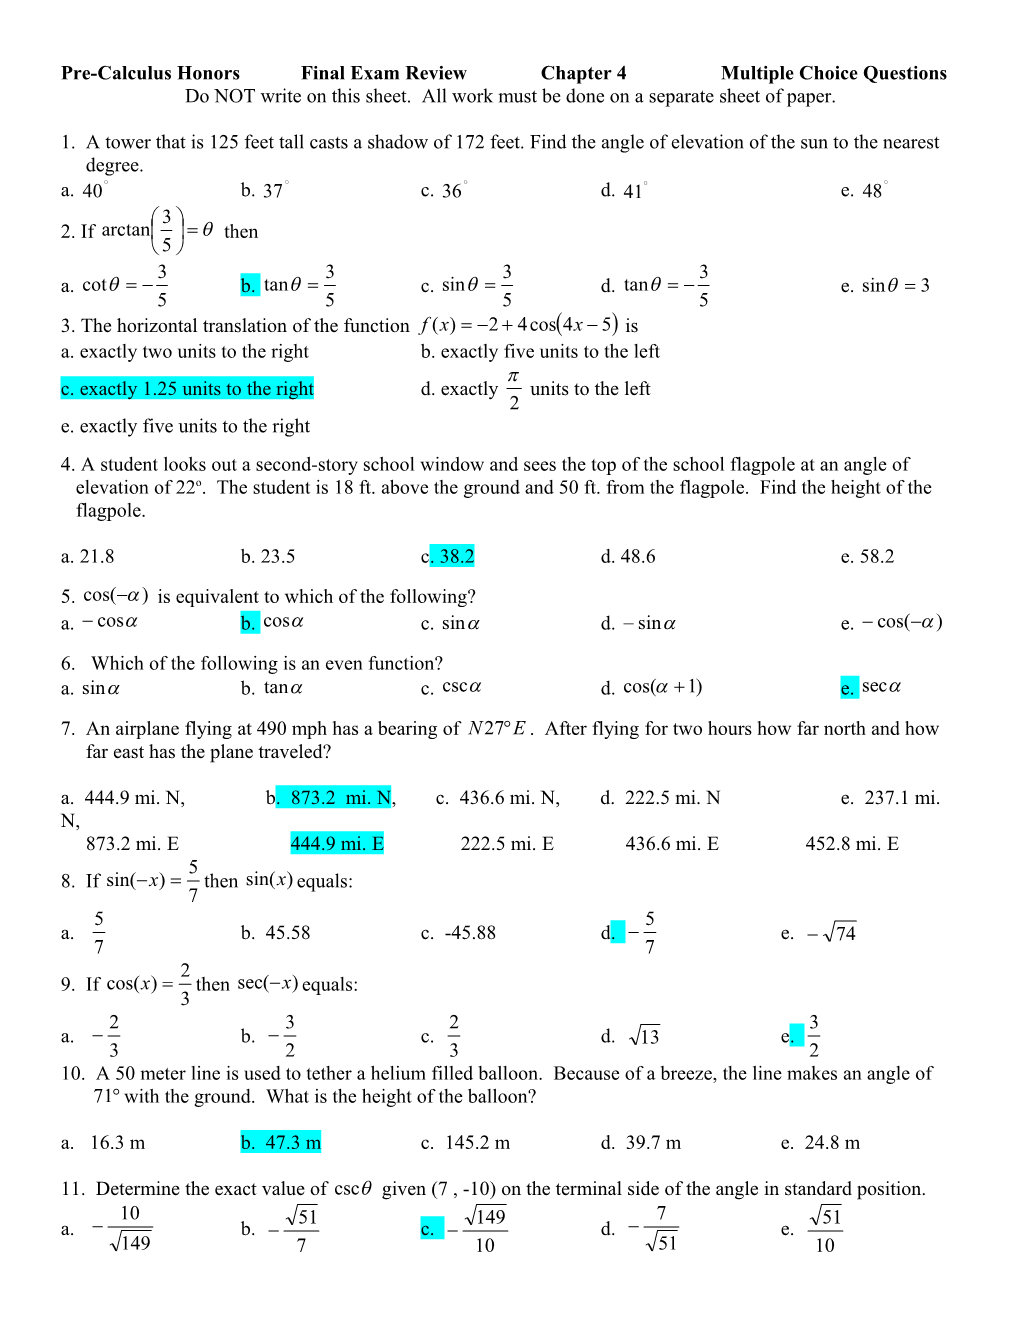 Pre-Calculus Honorsfinal Exam Reviewchapter 4Multiple Choice Questions